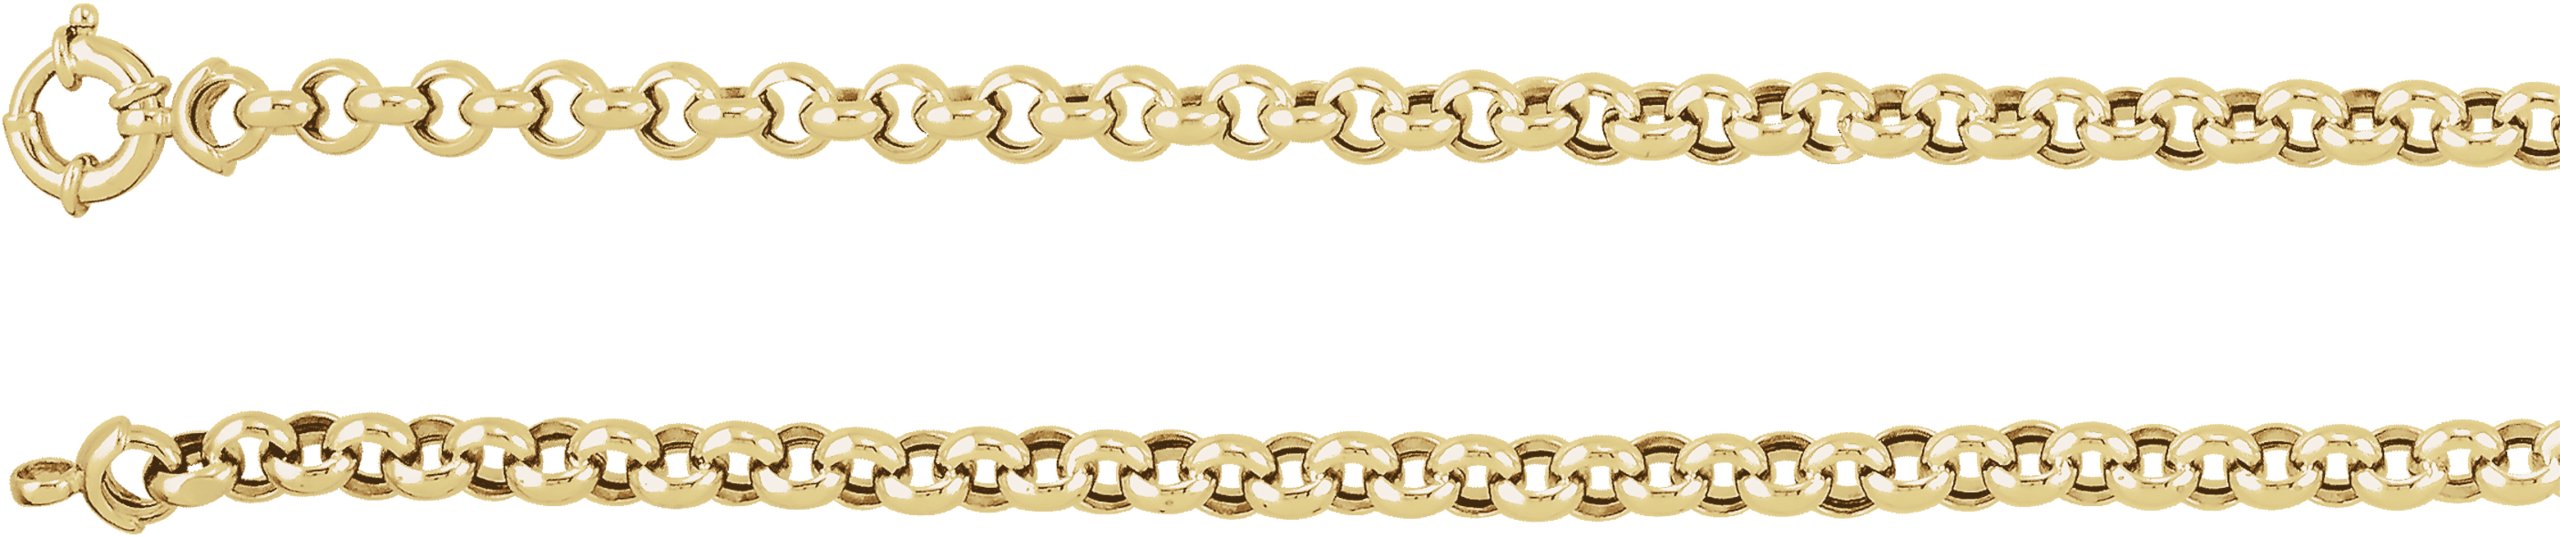 14K Yellow 6.5 mm Hollow Rolo 18" Chain
